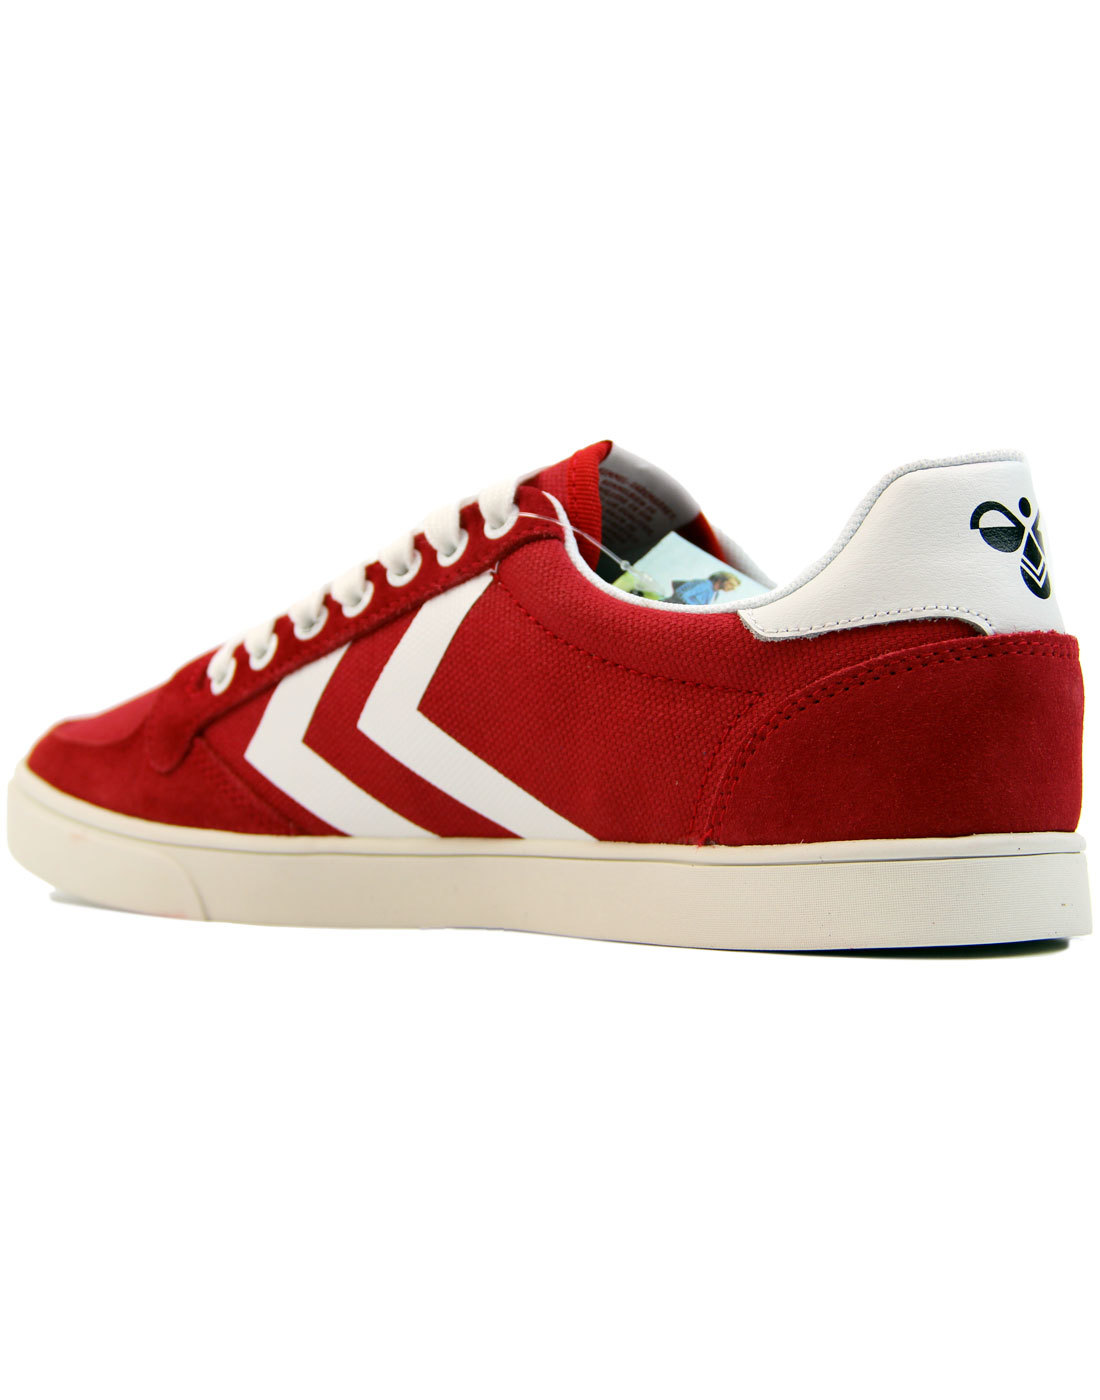 HUMMEL Slimmer Stadil Low Men's Retro 1970s Trainers in Red